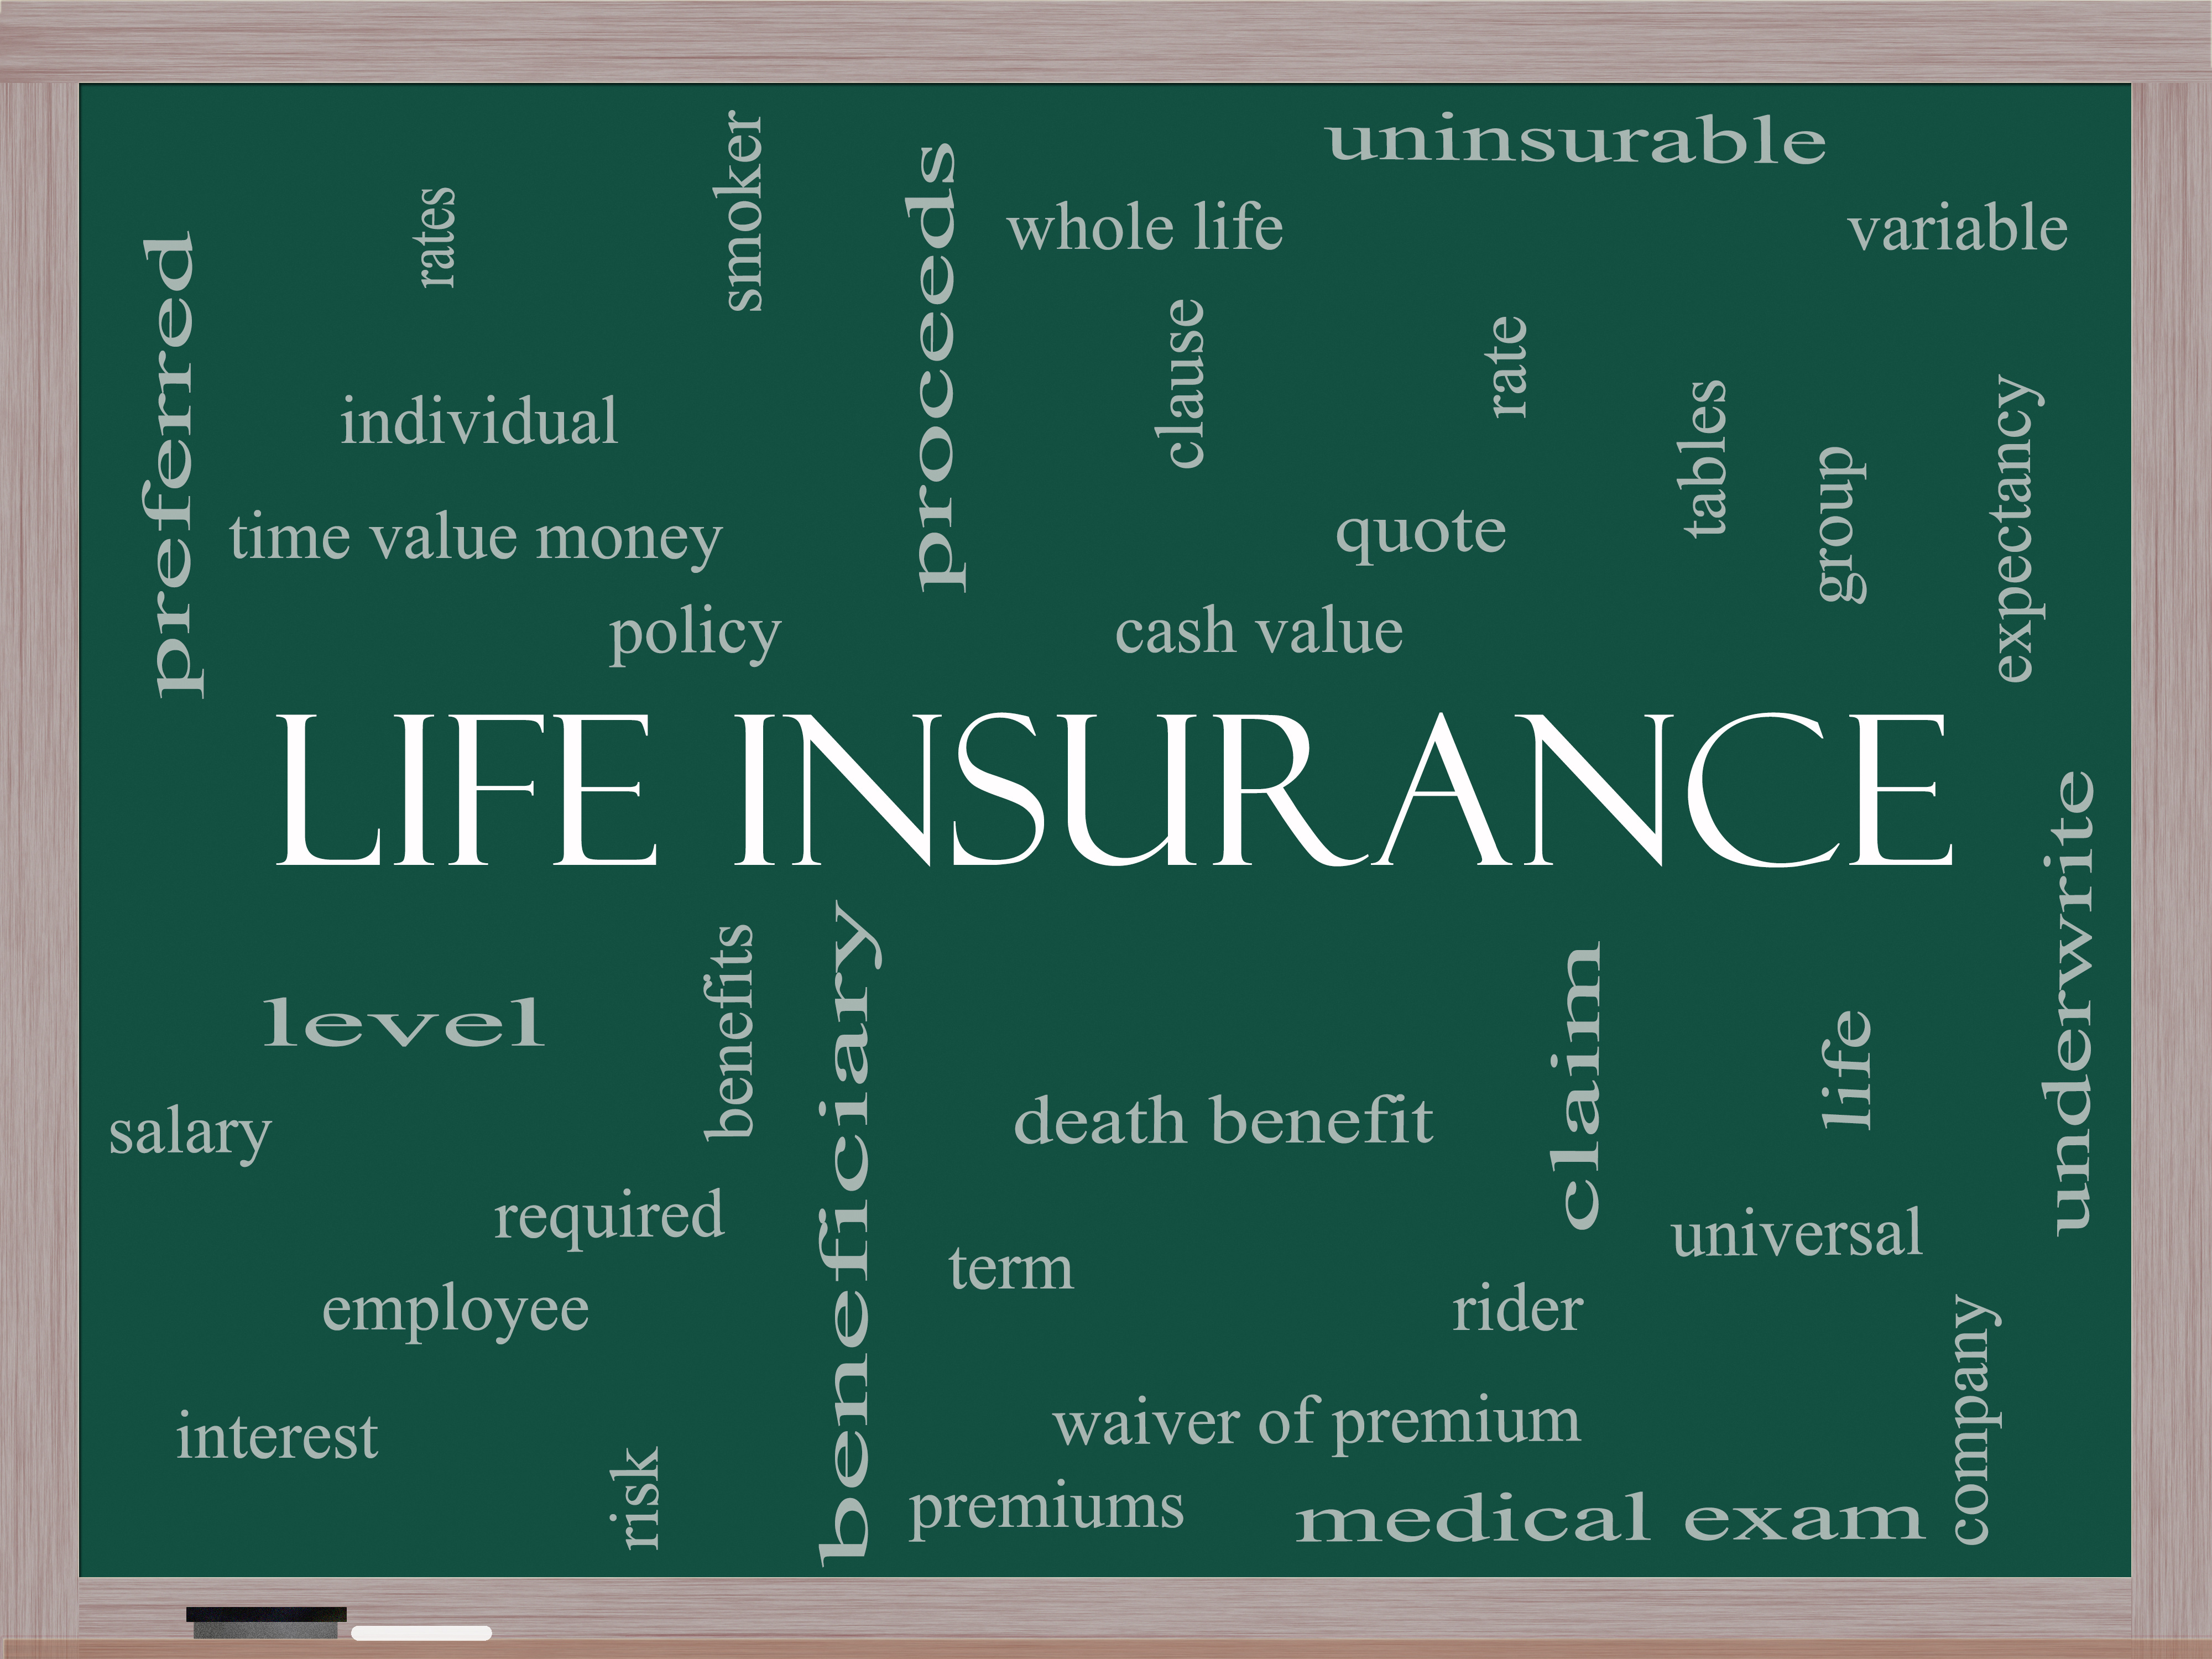 Shop The Best Senior Life Insurance Policies - Compare ...